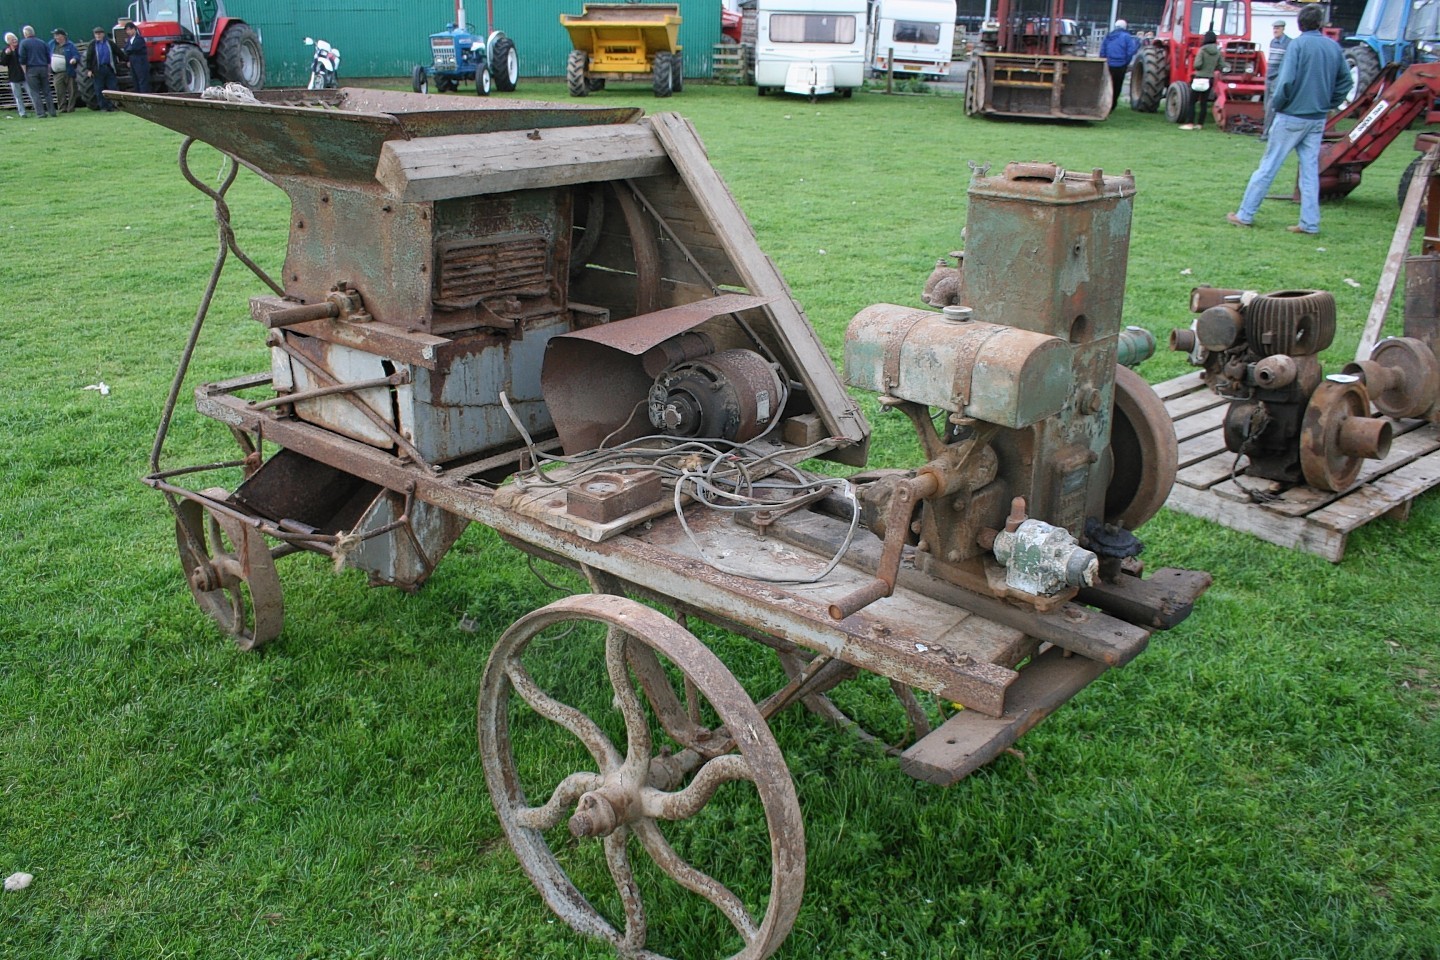 A Lister D engine used to drive this vintage turnip cutter. These engines often turn up at farm sales for collectors to buy and restore.